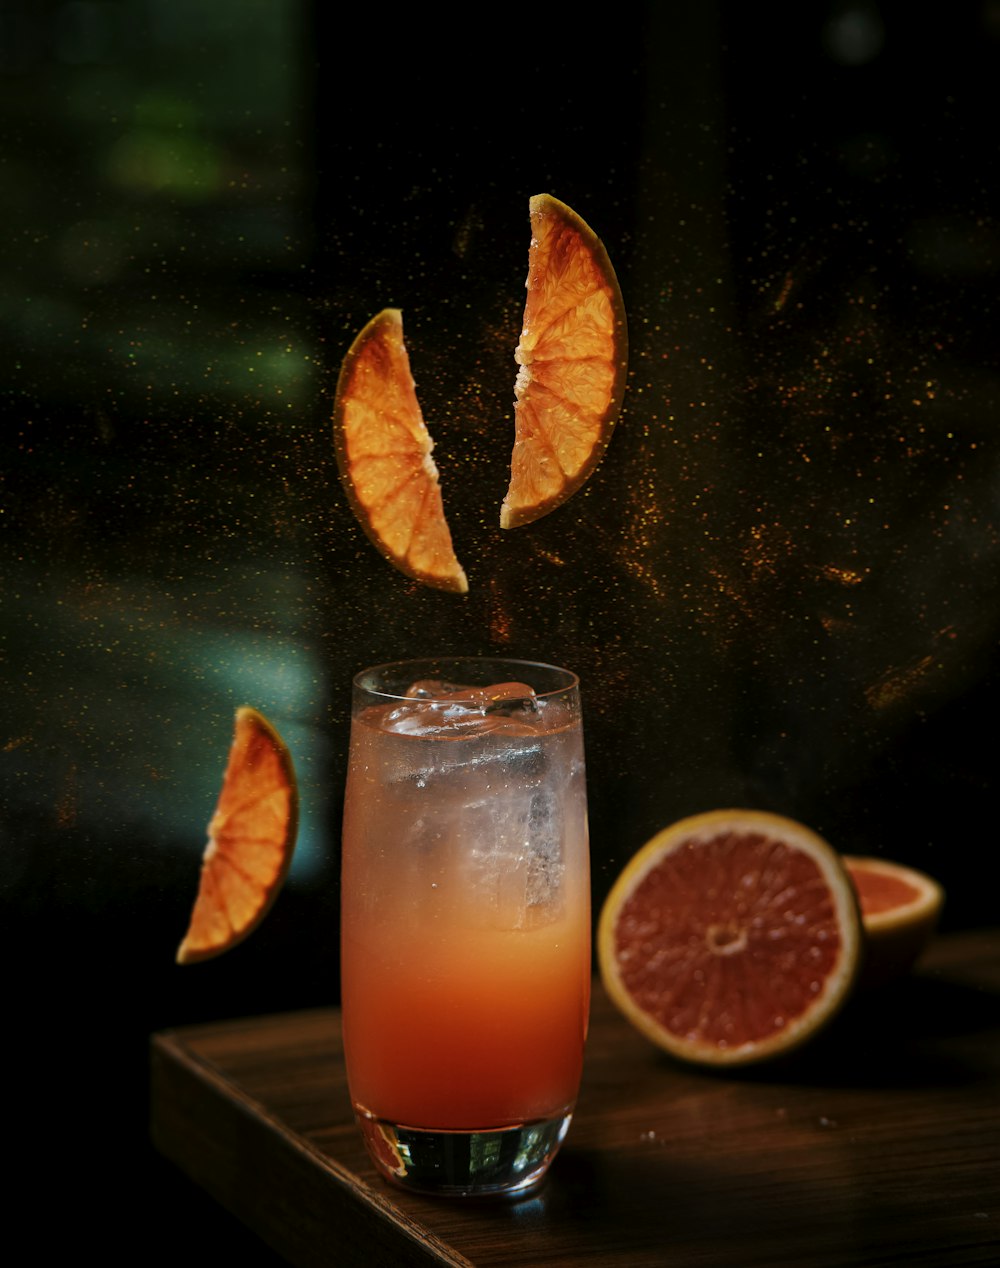 grapefruit and blood orange juice being poured into a glass